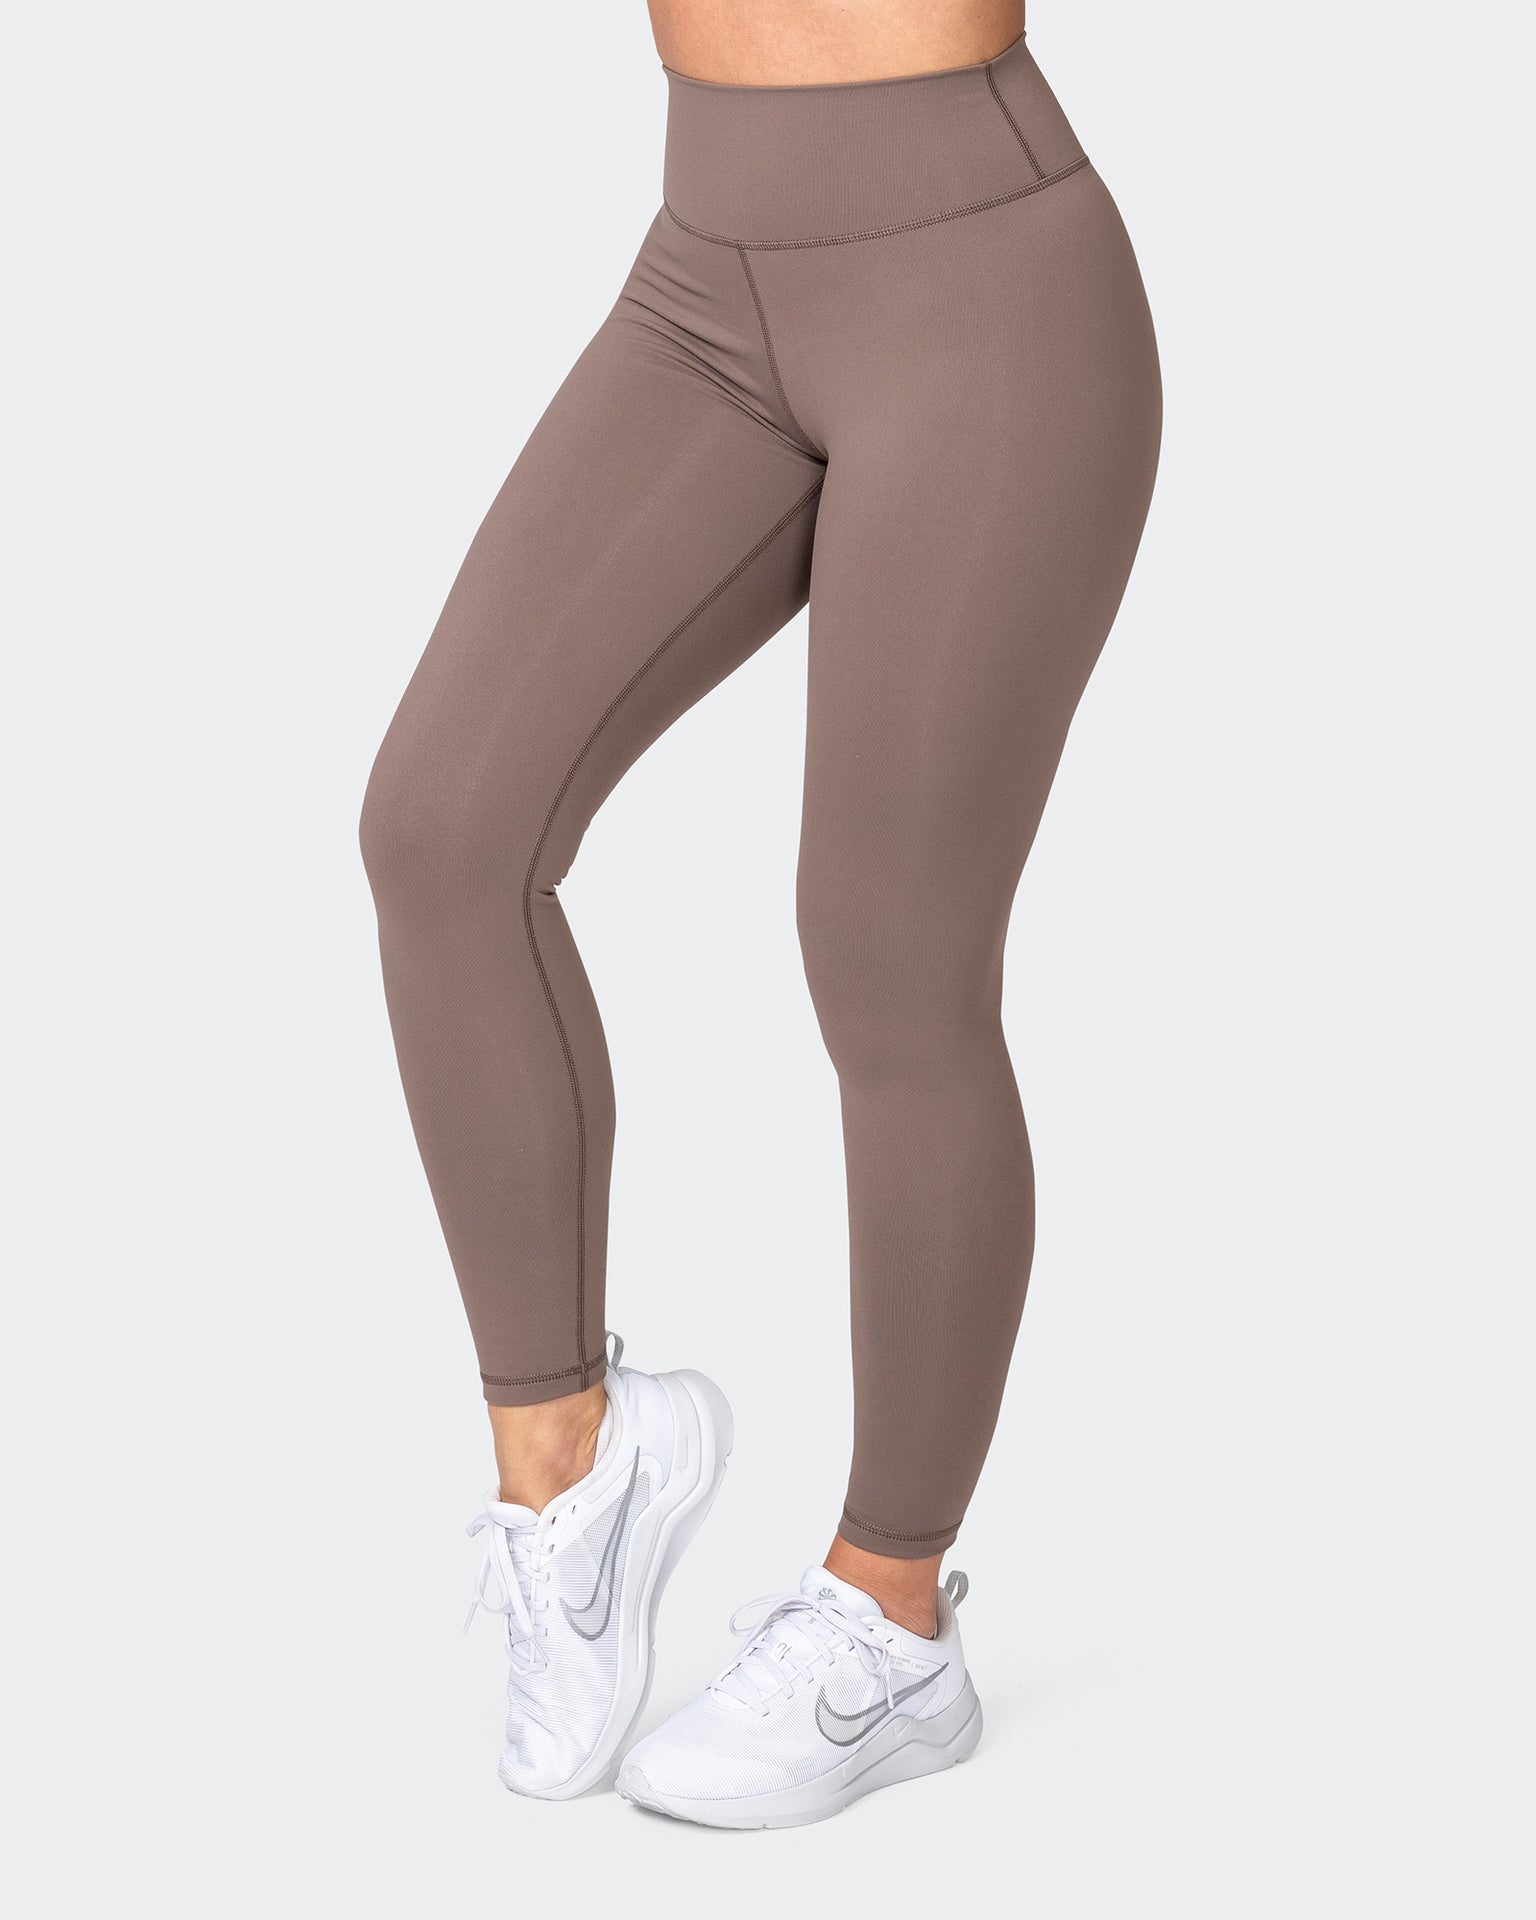 musclenation Gym Leggings Signature Scrunch Ankle Length Leggings - Taupe